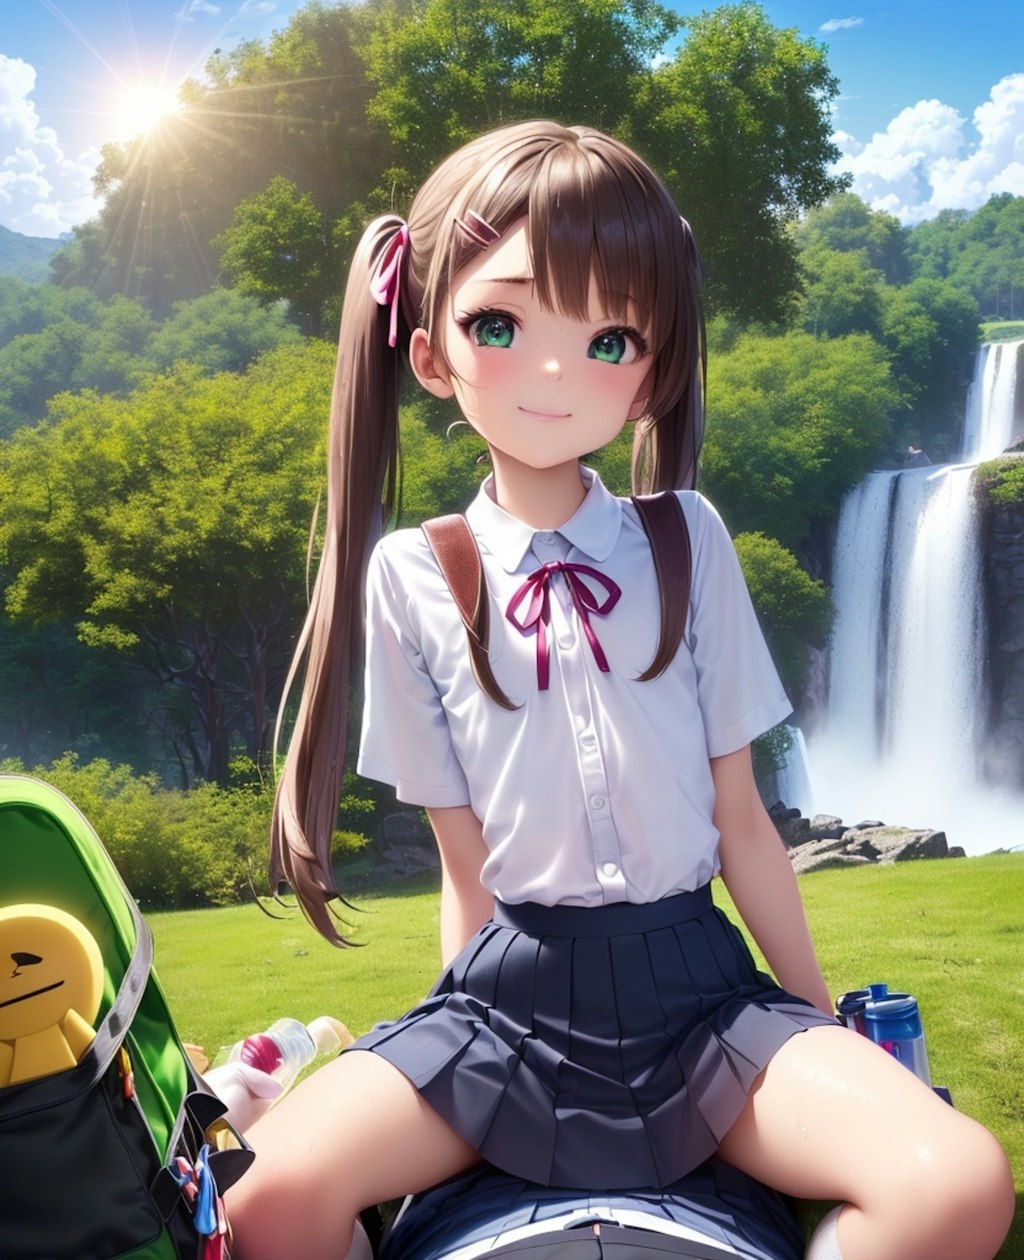 loli and Vast landscape_A3